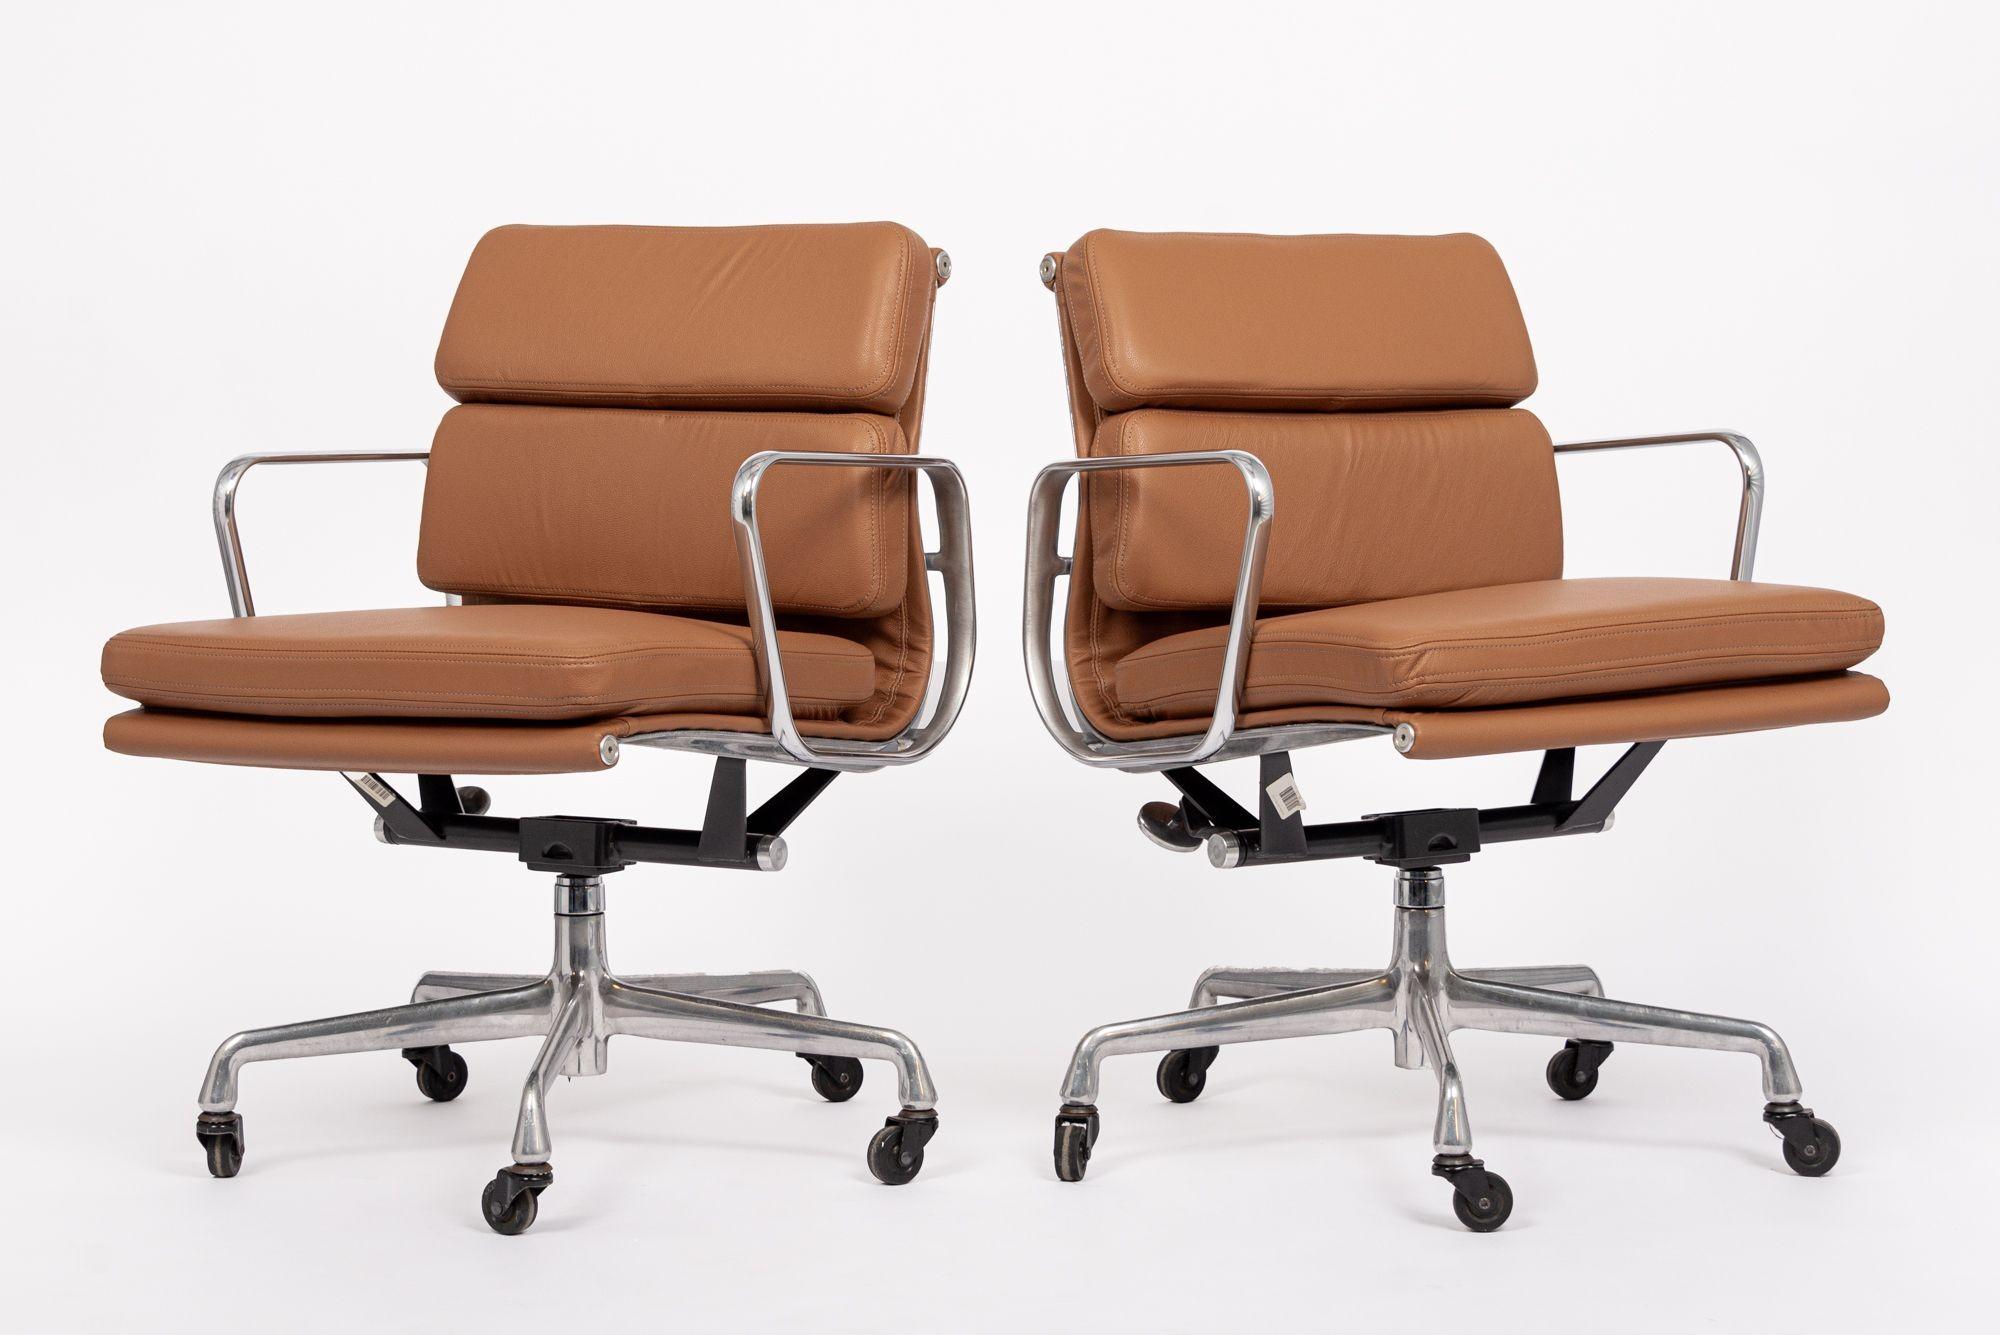 These authentic Eames for Herman Miller Soft Pad Management Height brown leather office chairs from the Aluminum Group Collection were manufactured in the 2000s. This classic mid century modern office chair was first introduced in 1969 by Charles